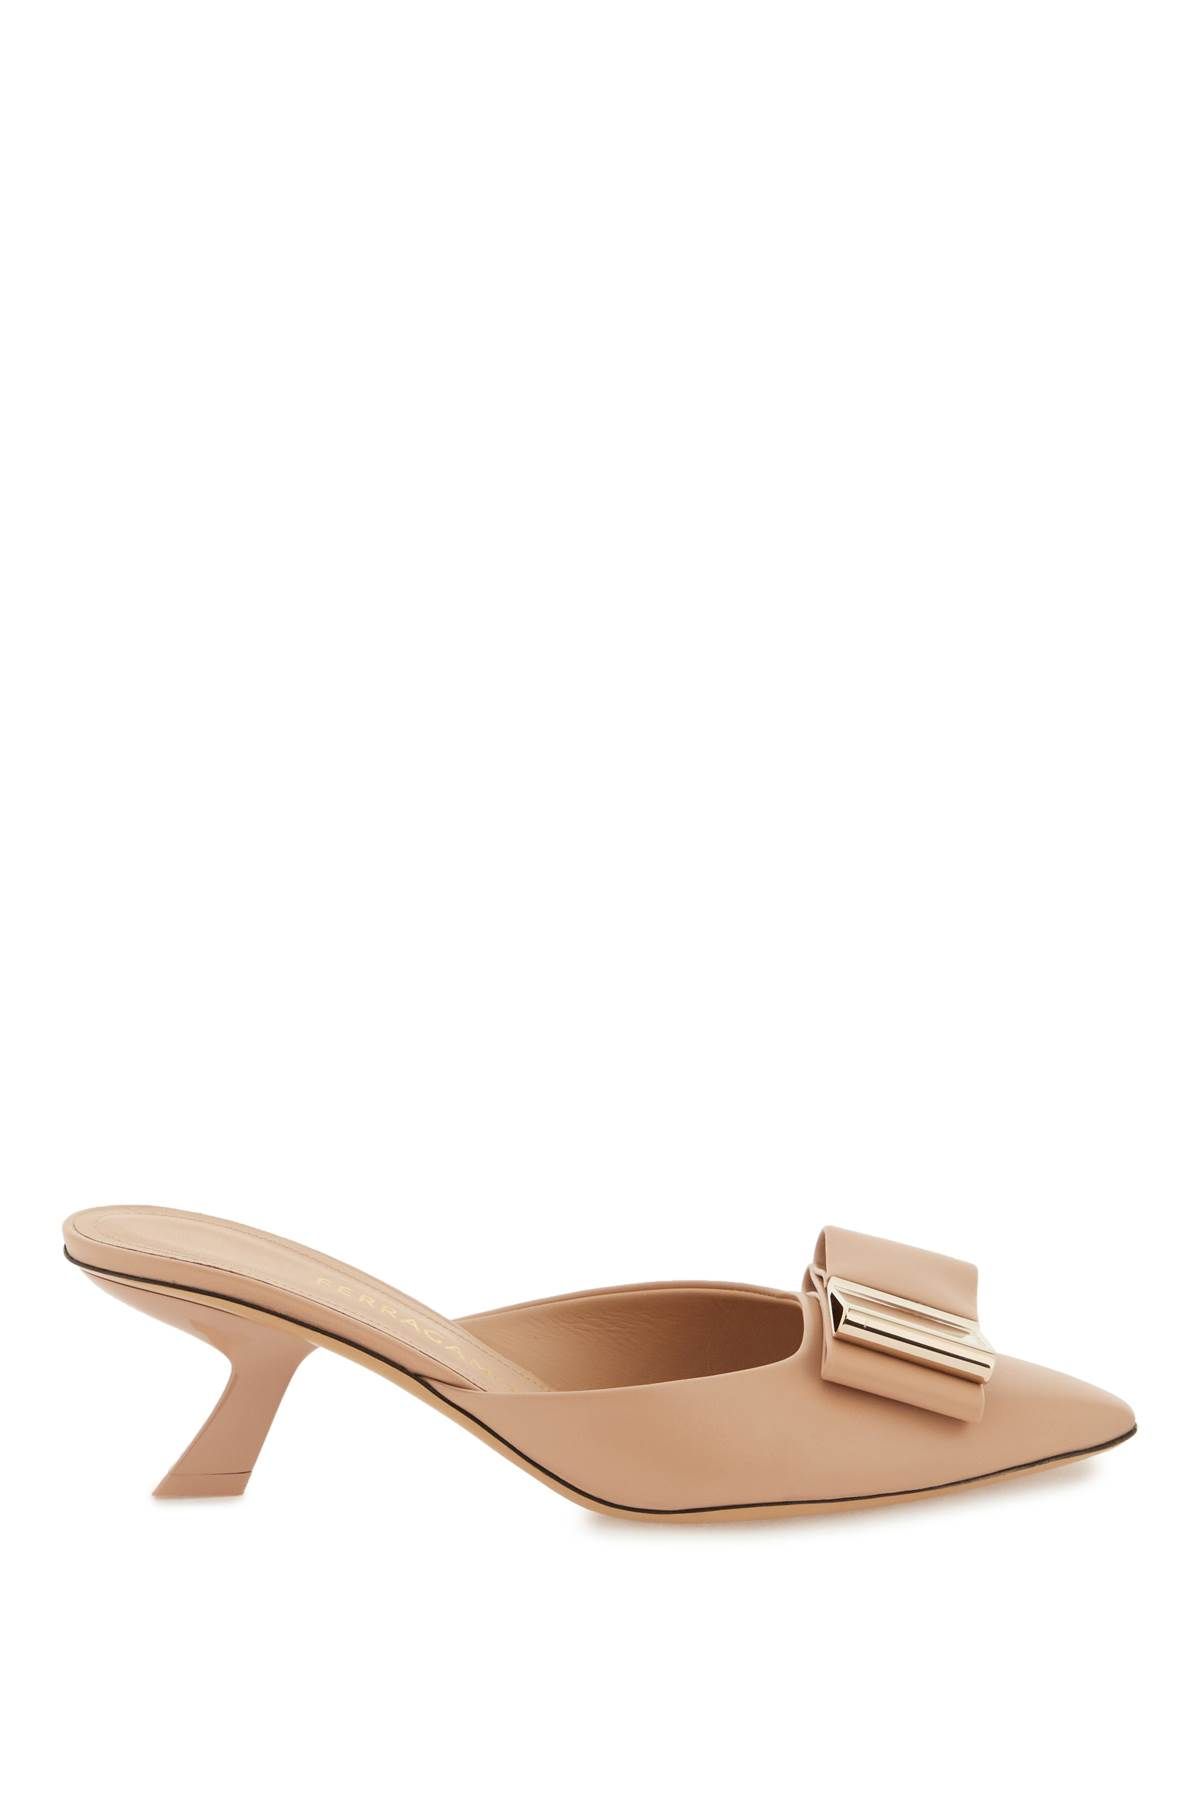 Shop Ferragamo Mules With Double Bow In Beige